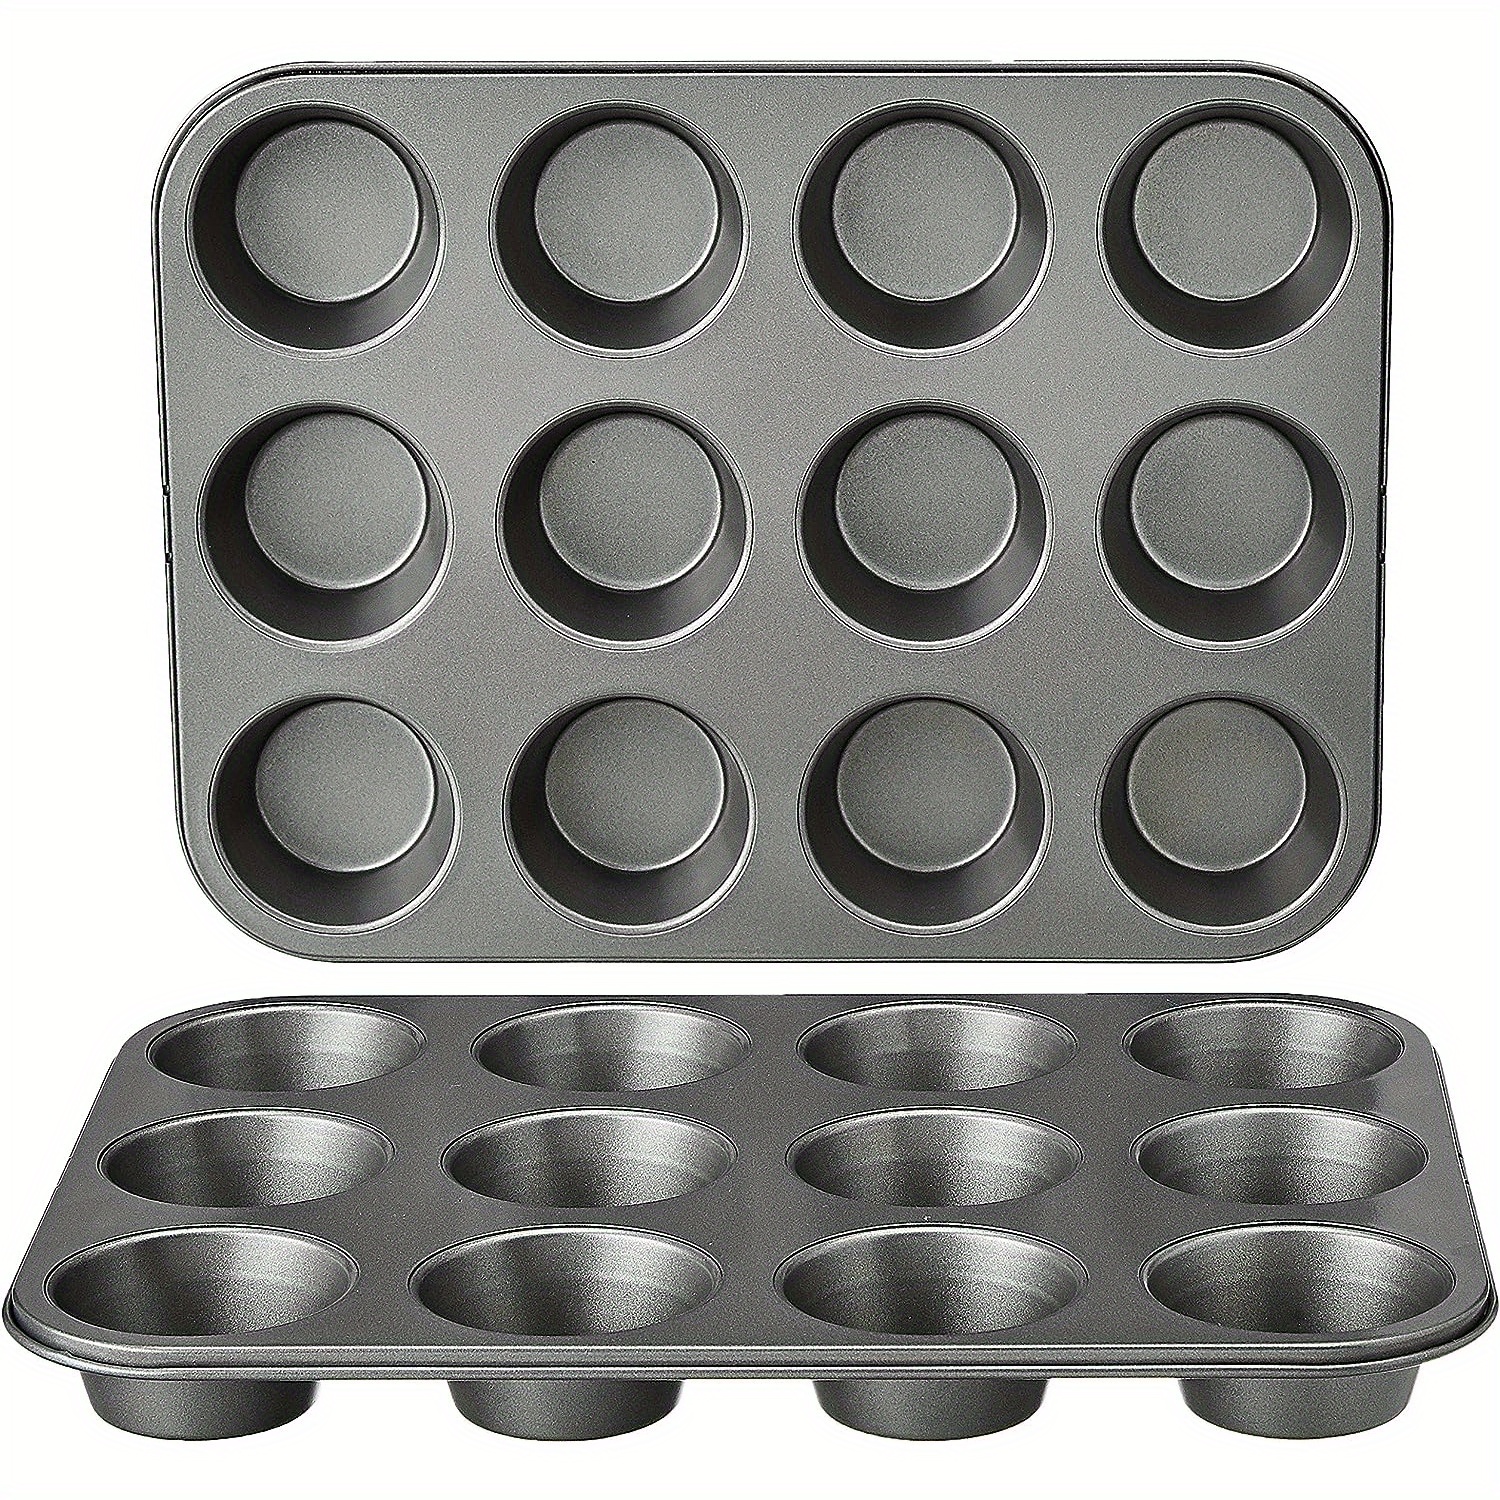 Walfos Silicone Whoopie Pie Baking Pans, 3 Pcs Non-Stick Muffin Top Pan.  Food Grade and BPA Free Silicone, Great for Muffin, Eggs, Tarts and More